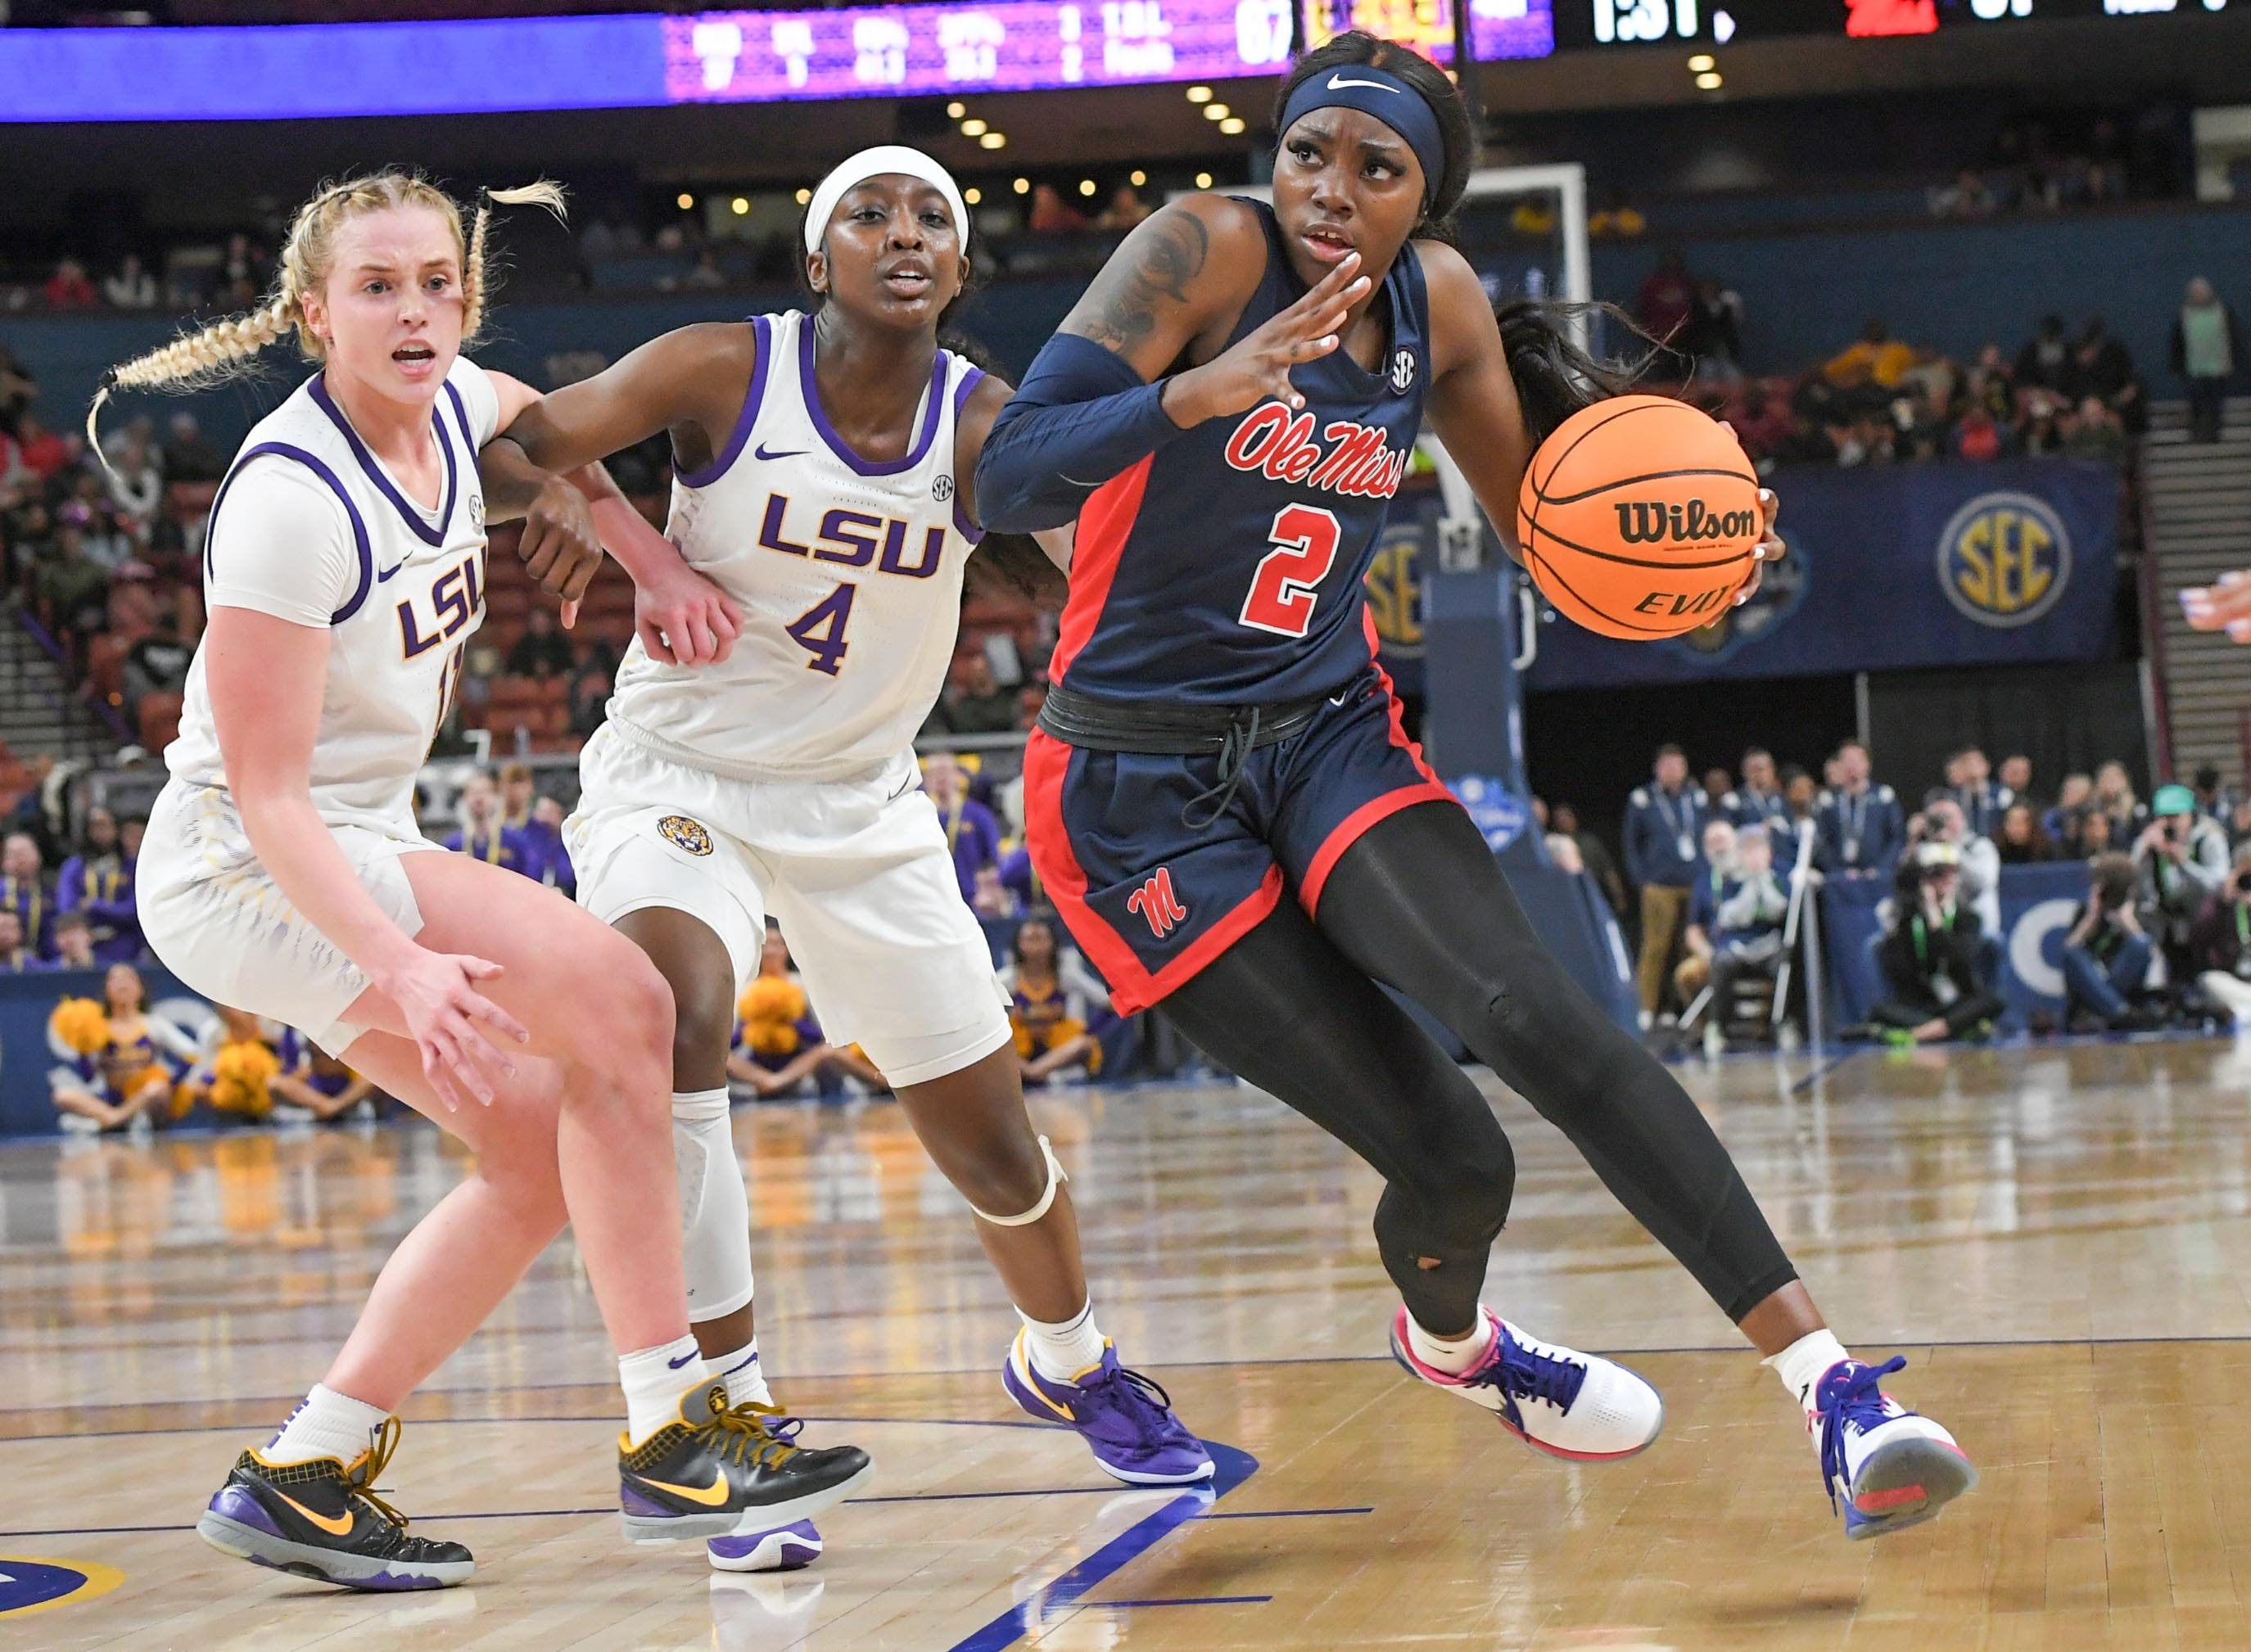 Ole Miss guard Marquesha Davis (2) drives by Louisiana State University guard Flau'jae Johnson (4) and Hailey Van Lith (11) during the fourth quarter of the SEC Women's Basketball Tournament game at the Bon Secours Wellness Arena in Greenville, S.C. Saturday, March 9, 2024.